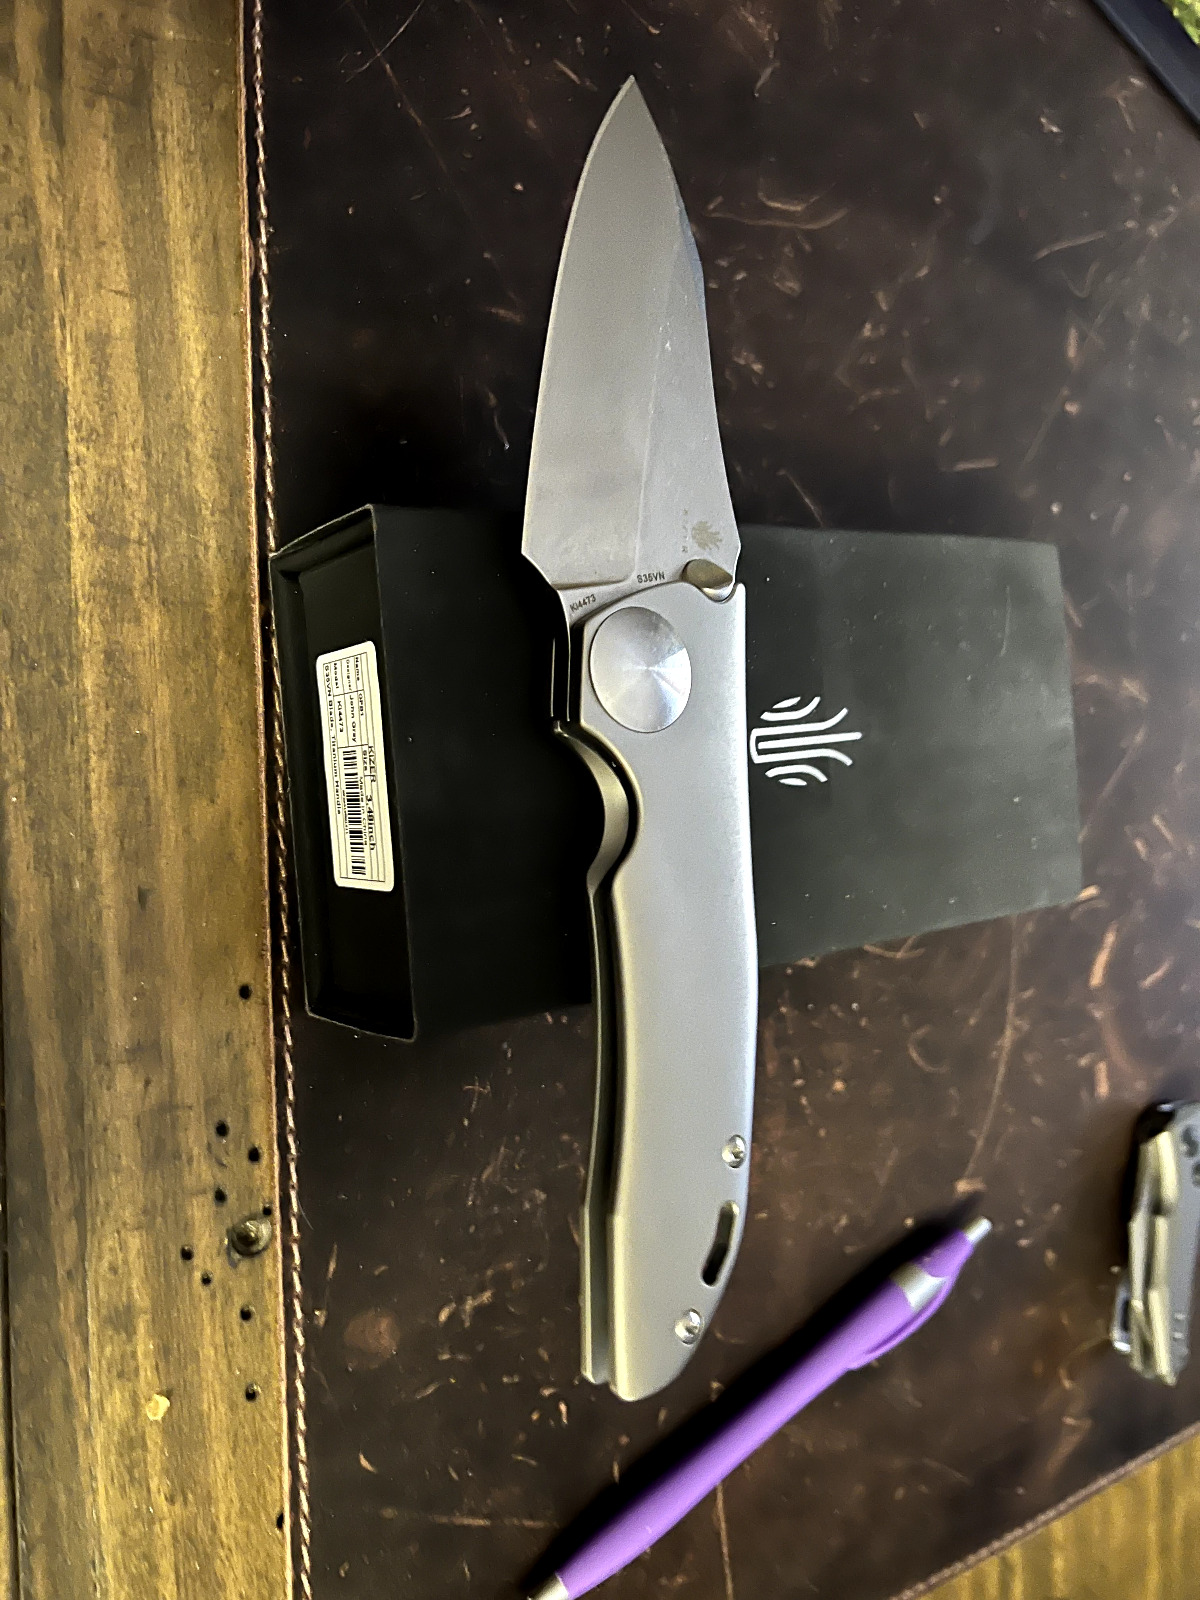 kizer gpb1 Used but never cut anything